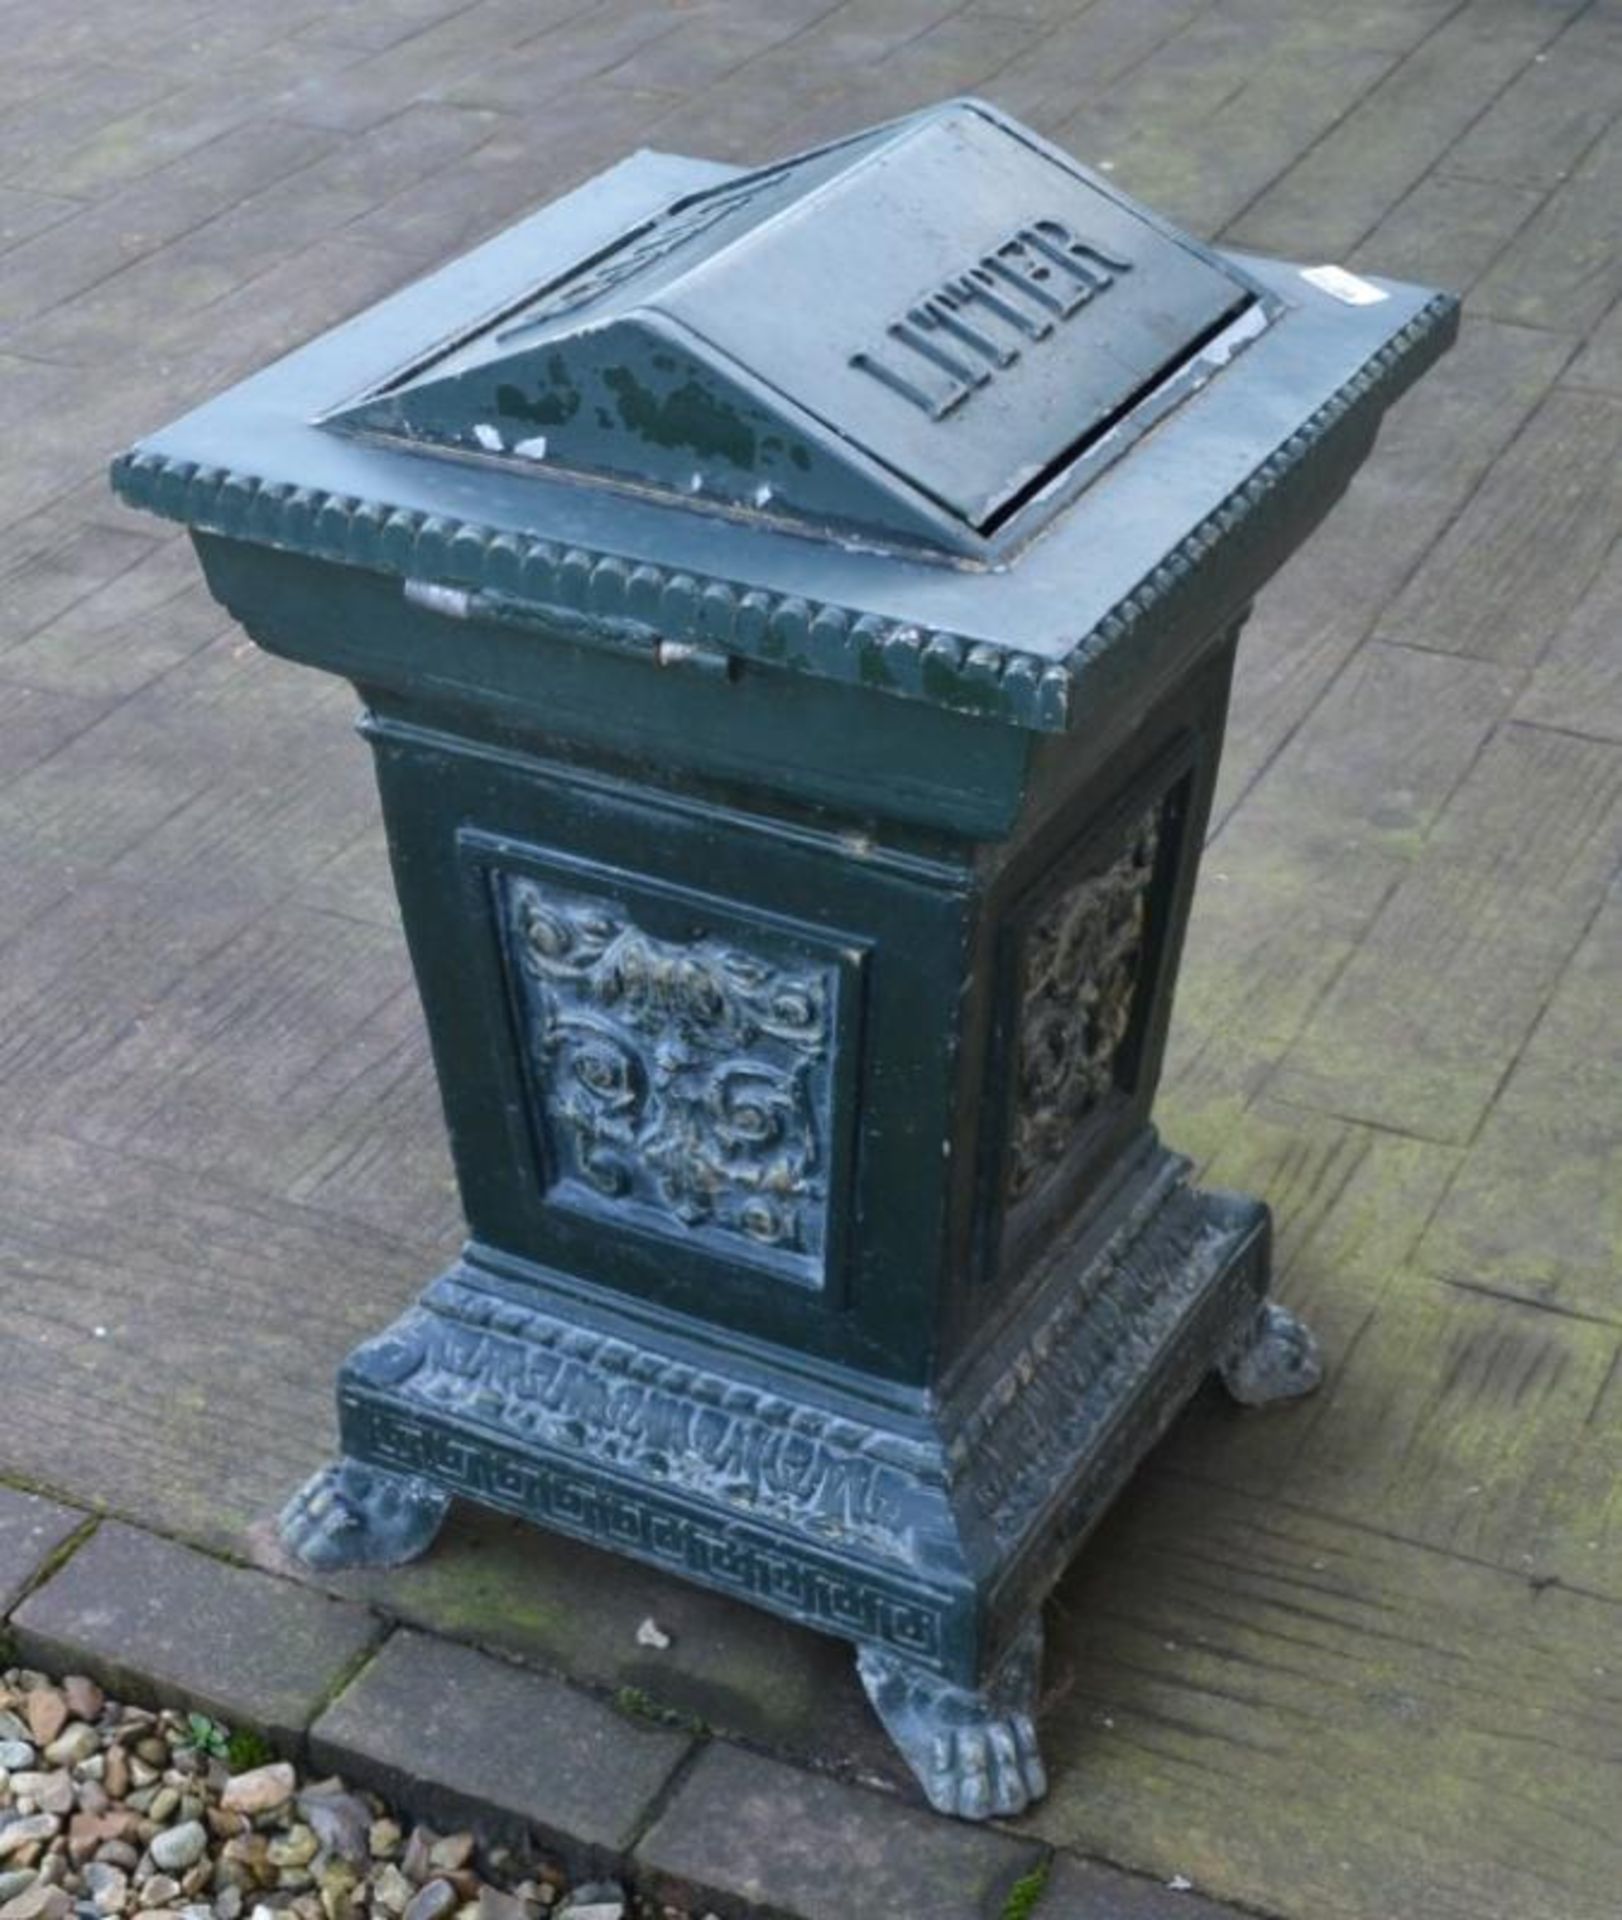 1 x Cast Metal Litter Bin in Green and Gold With Decorative Features and Claw Feet - H79 x W50 x D51